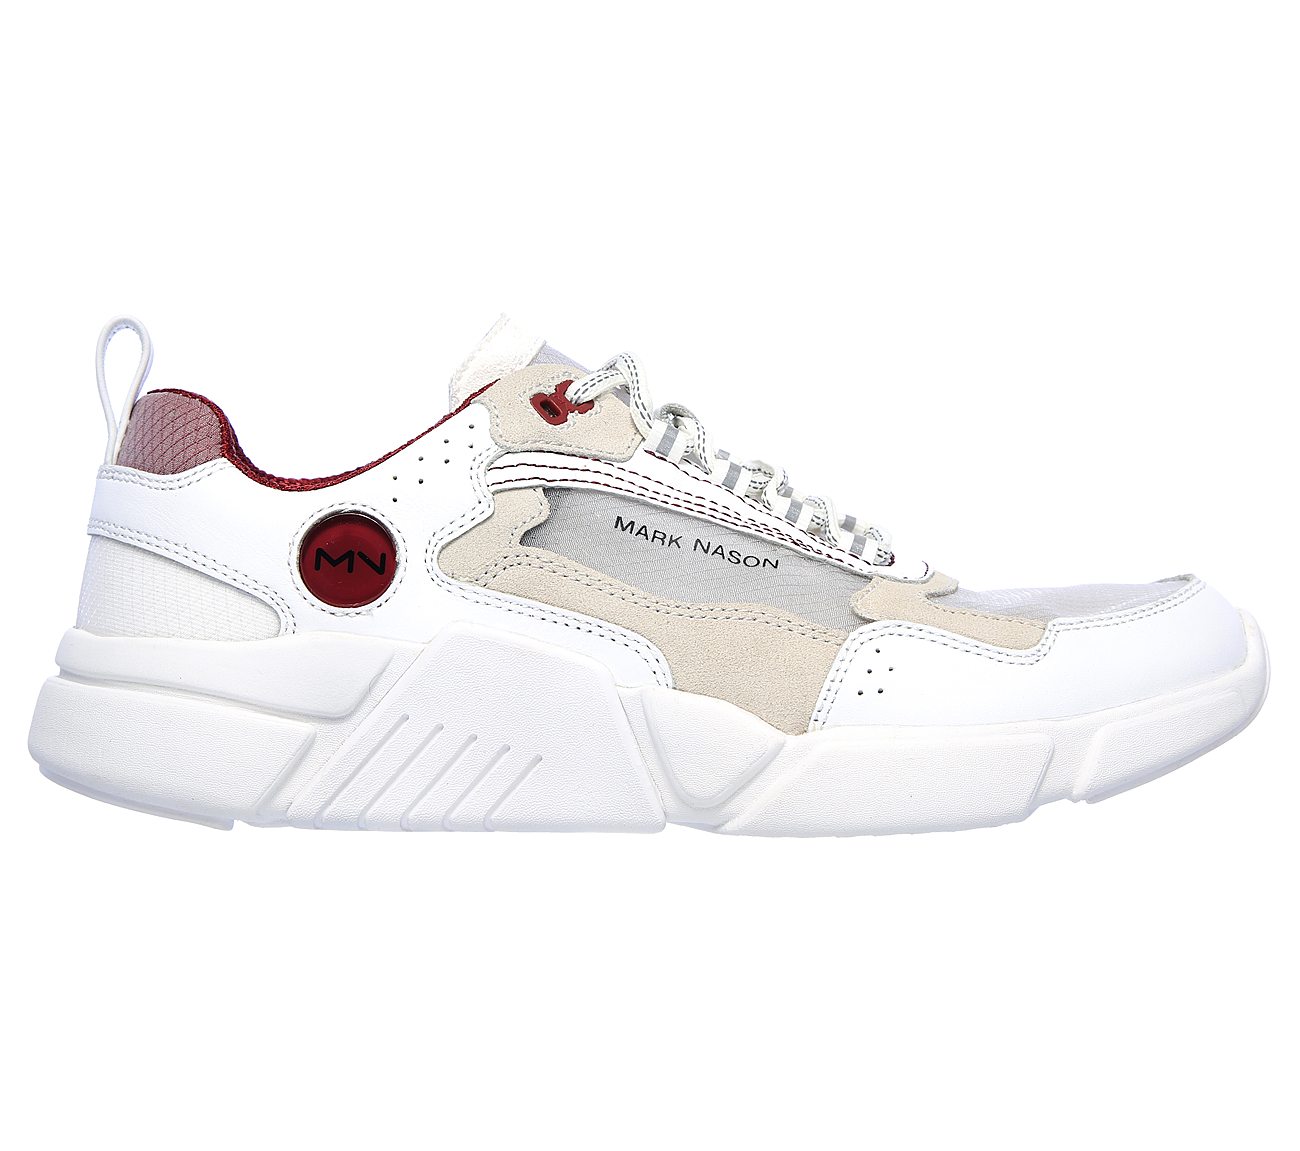 BLOCK - HAZE, WHITE/RED Footwear Right View